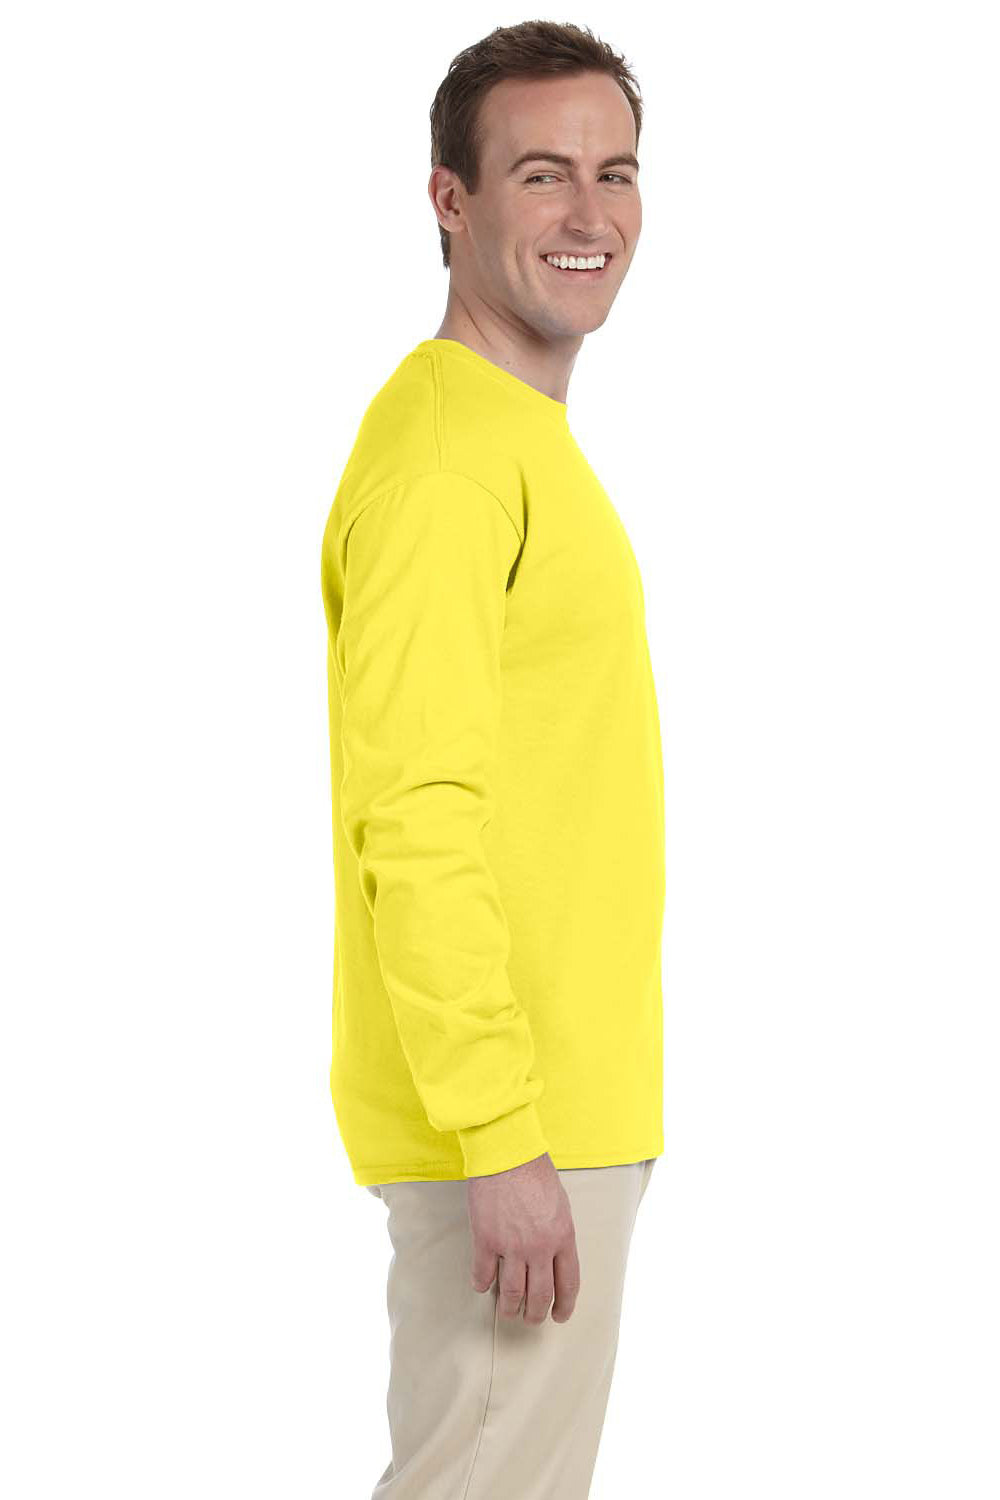 Fruit Of The Loom 4930 Mens HD Jersey Long Sleeve Crewneck T-Shirt Yellow Side